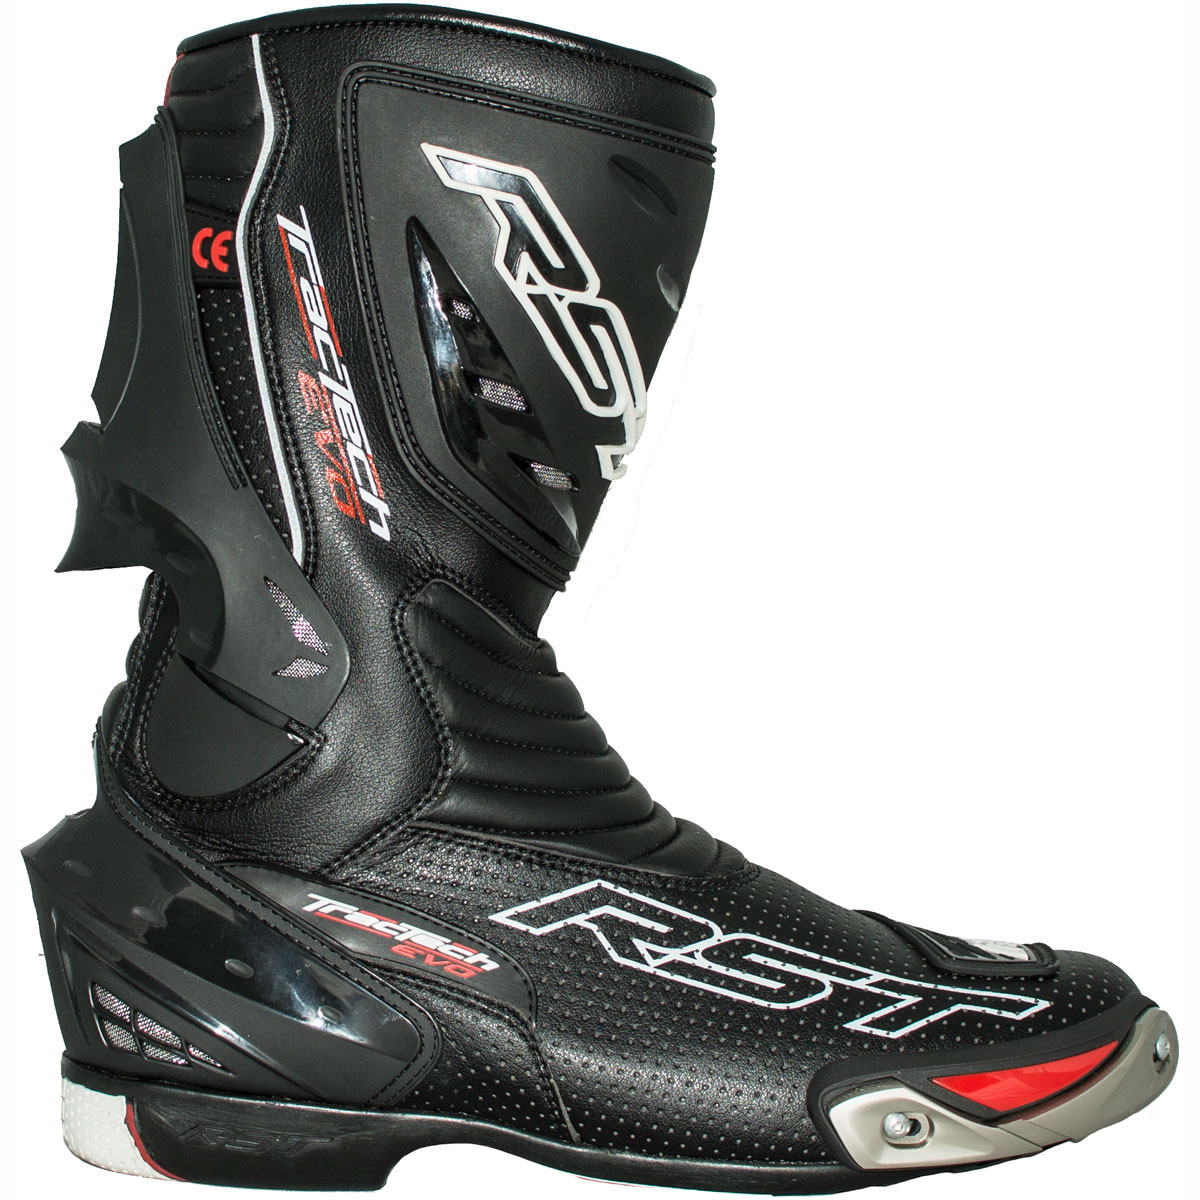 RST Tractech Evo boots